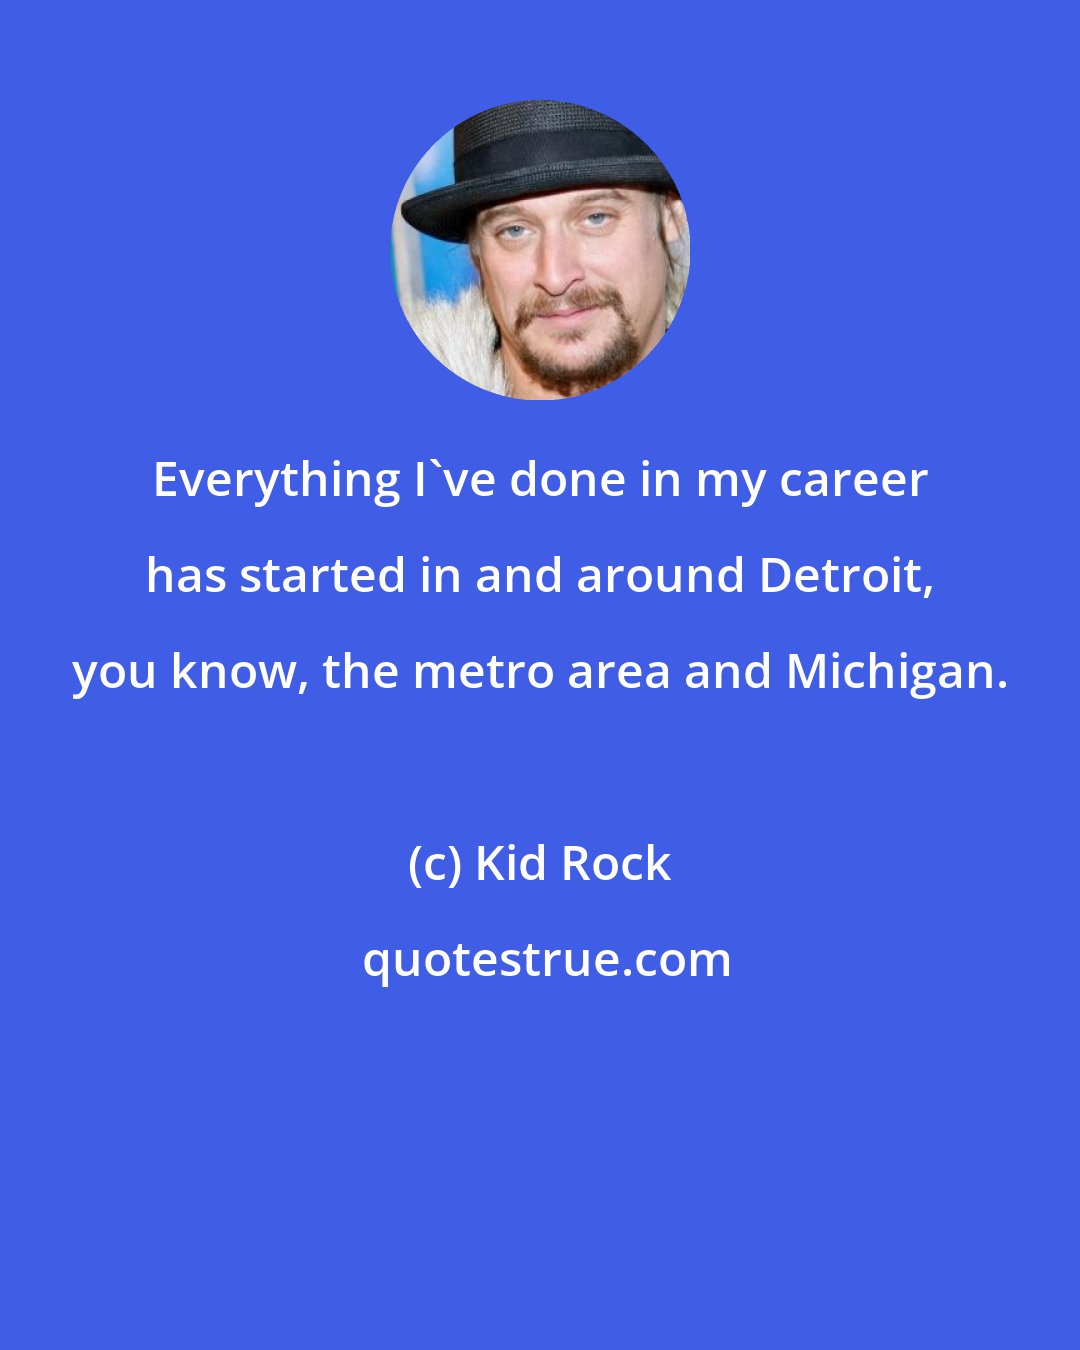 Kid Rock: Everything I've done in my career has started in and around Detroit, you know, the metro area and Michigan.